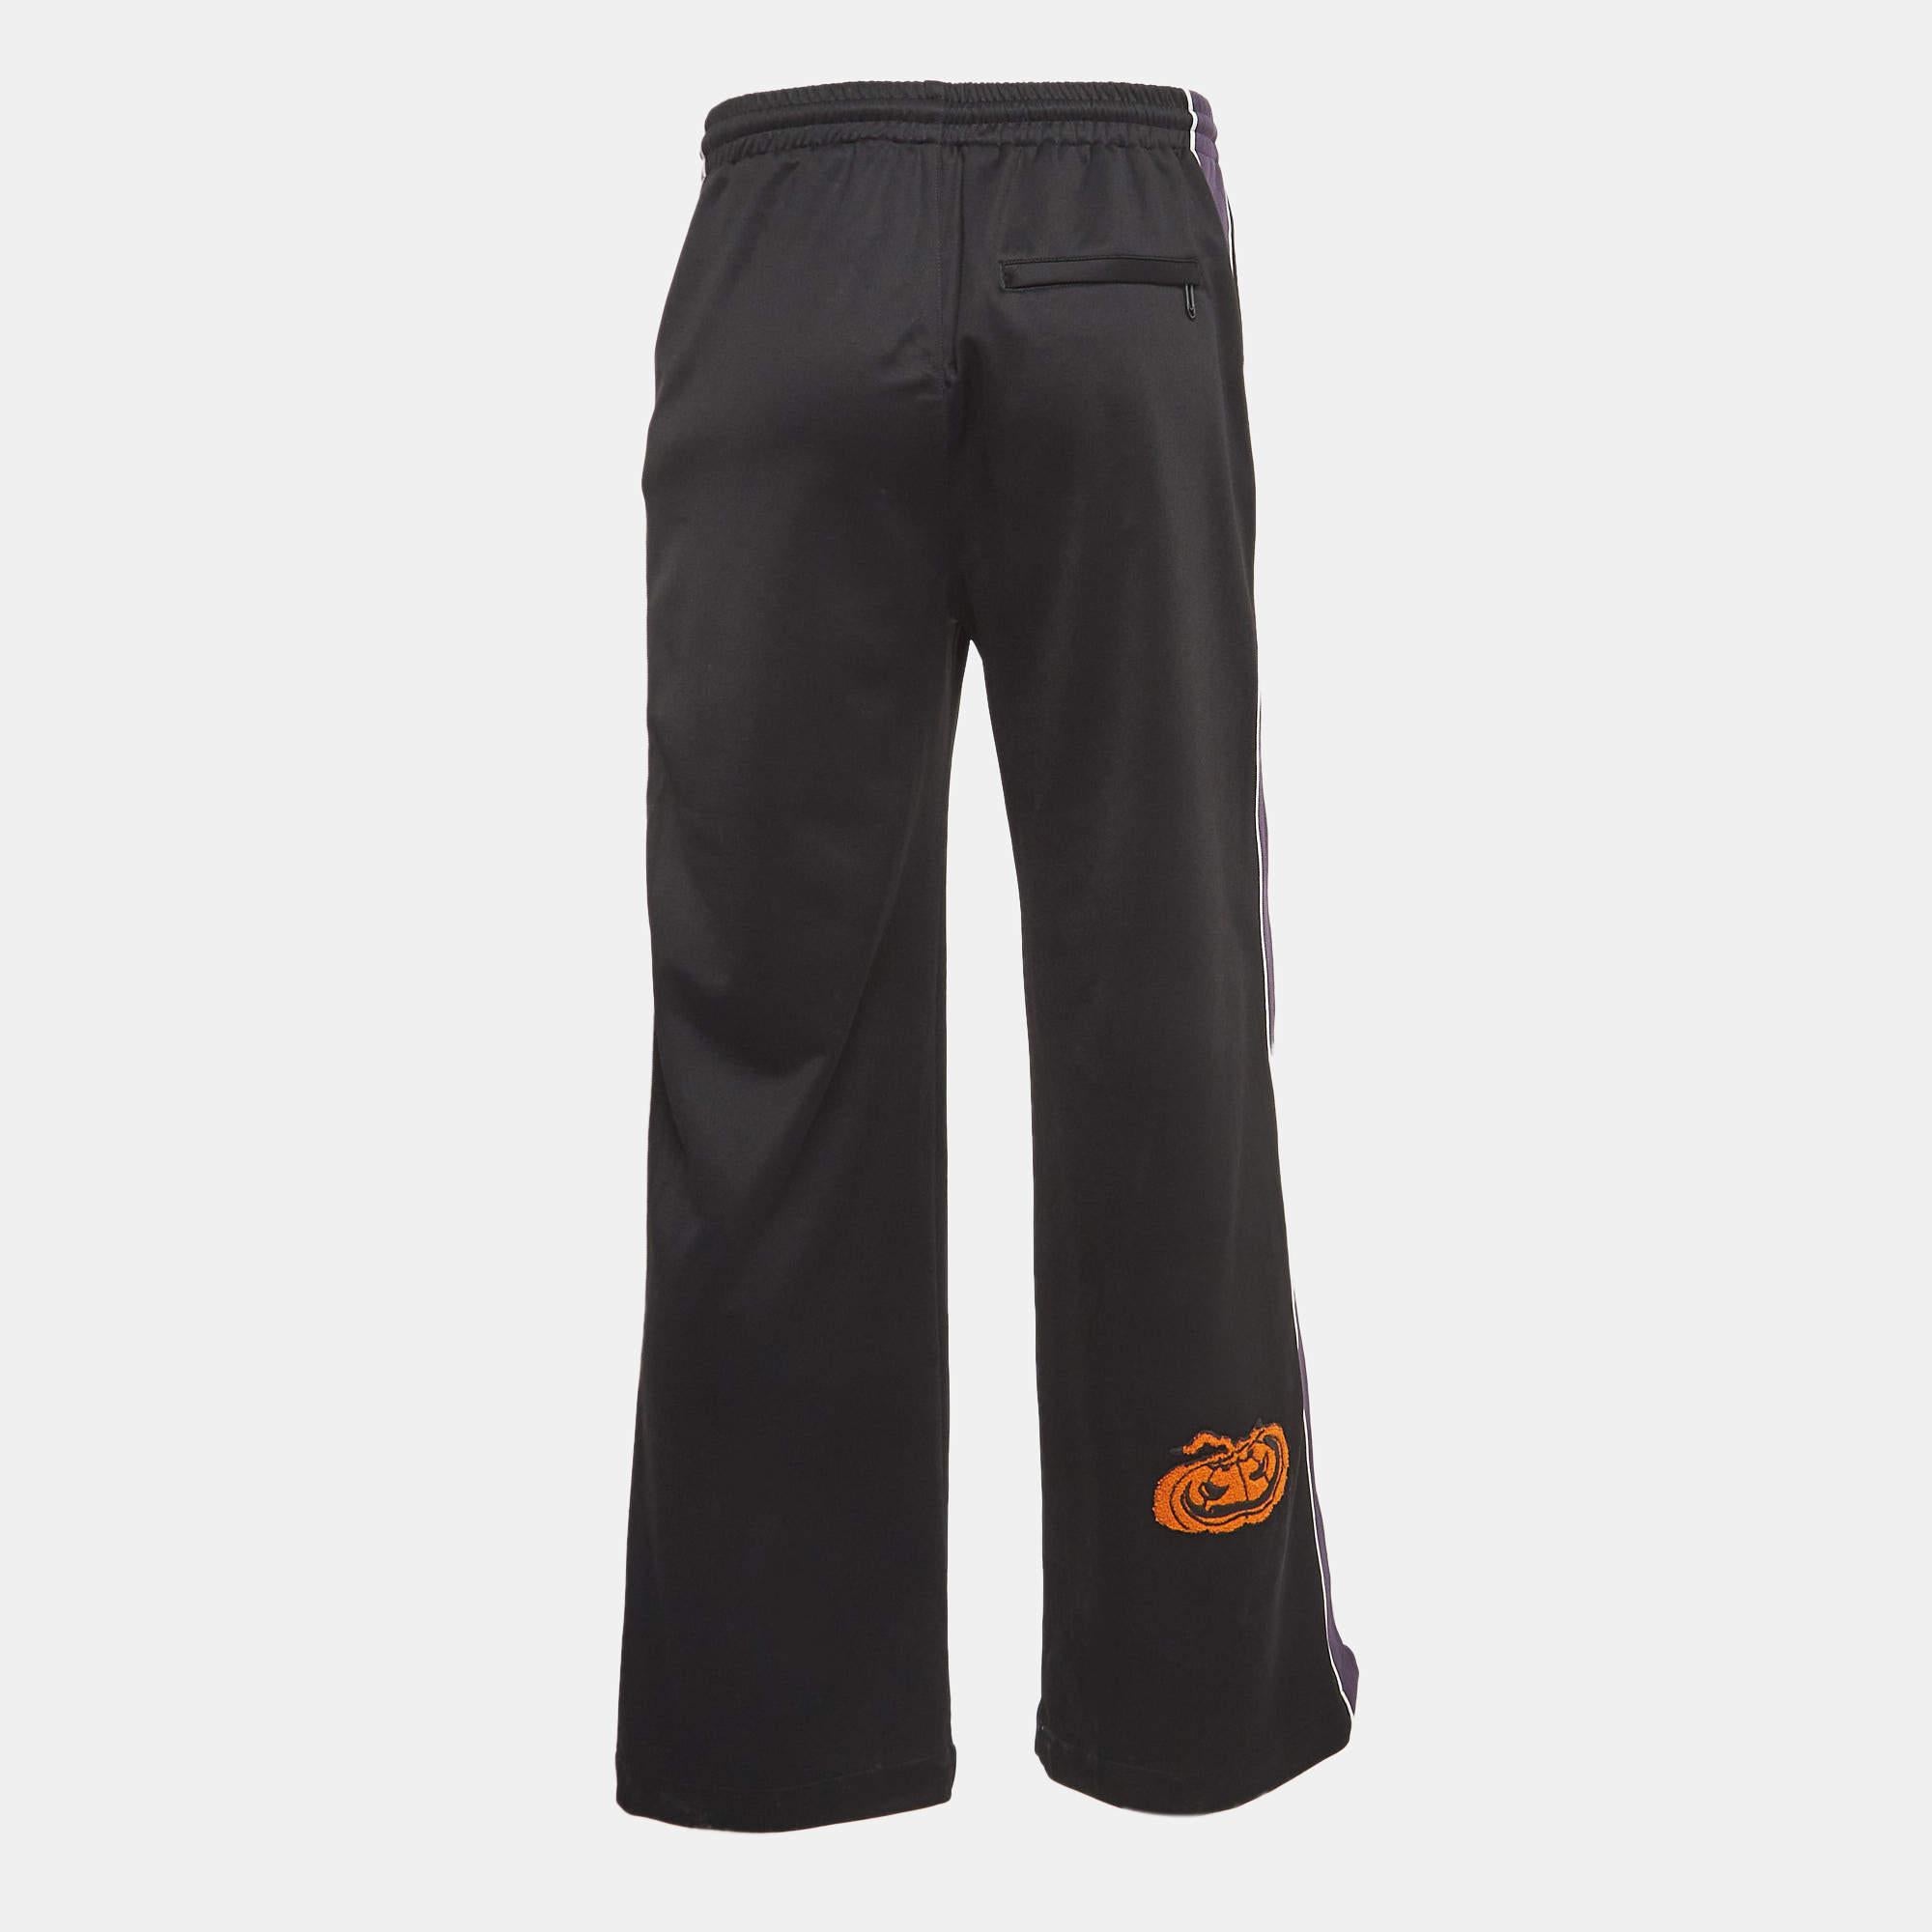 Track pants like these are the best addition to your wardrobe. They are made from great fabrics and showcase a superb fit.

Includes: Price Tag